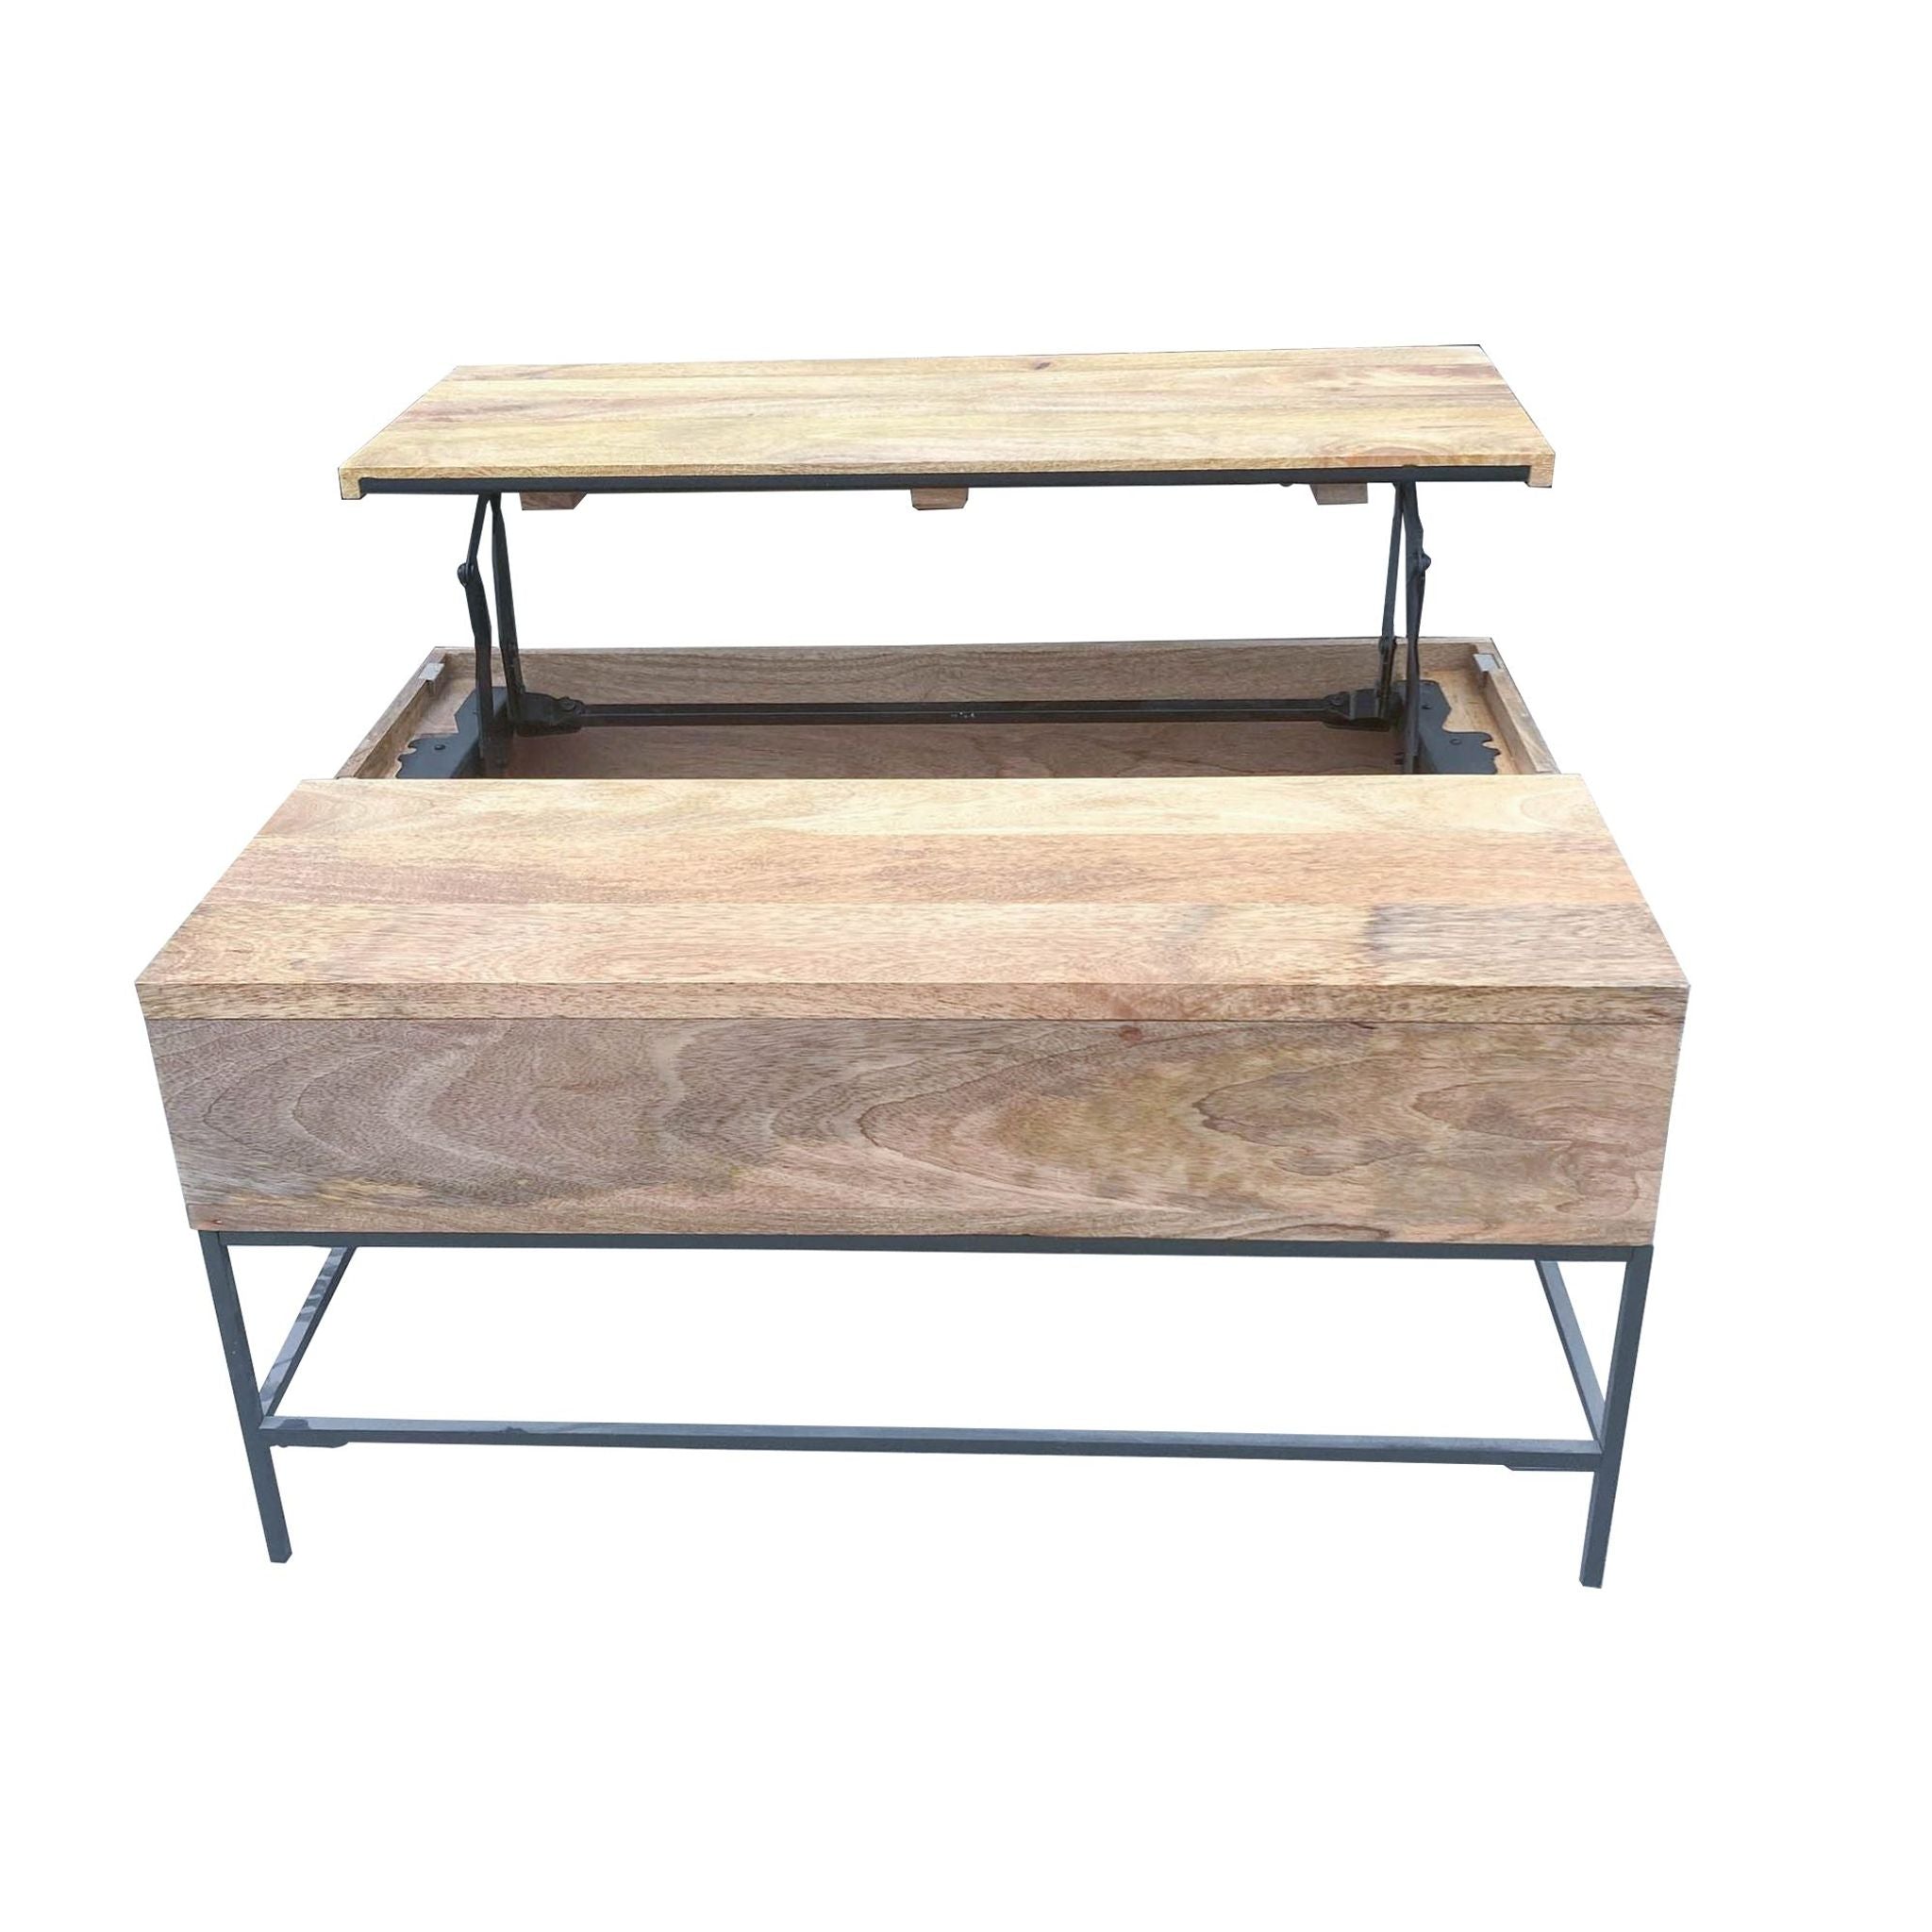 Mango wood coffee table by West Elm with top partially lifted, revealing storage compartment underneath.